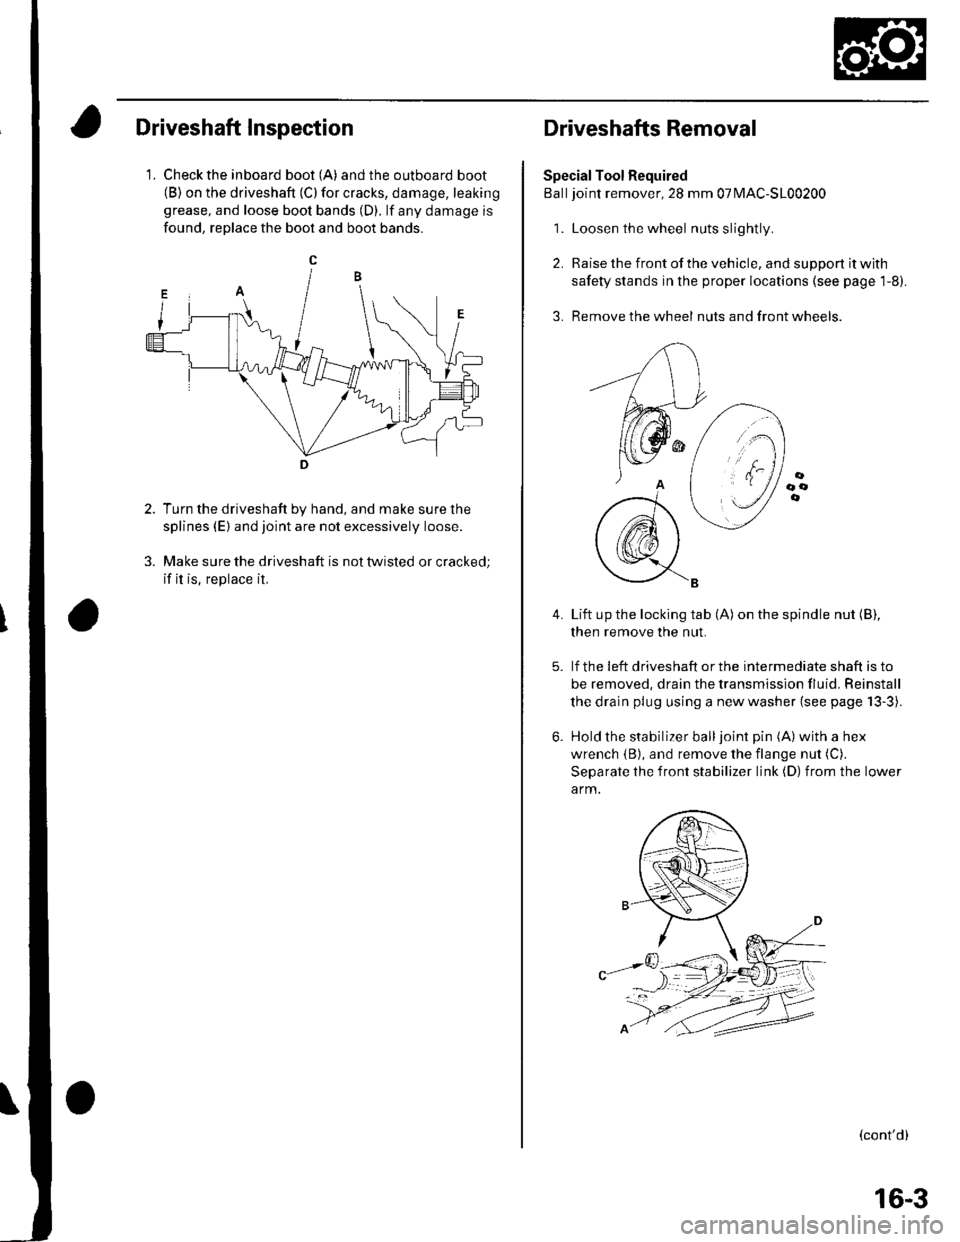 HONDA CIVIC 2003 7.G Workshop Manual Driveshaft Inspection
1. Check the inboard boot (A) andthe outboard boot(B) on the driveshaft (C) for cracks, damage, leaking
grease, and loose boot bands (D). lf any damage is
found, reDlace the boot